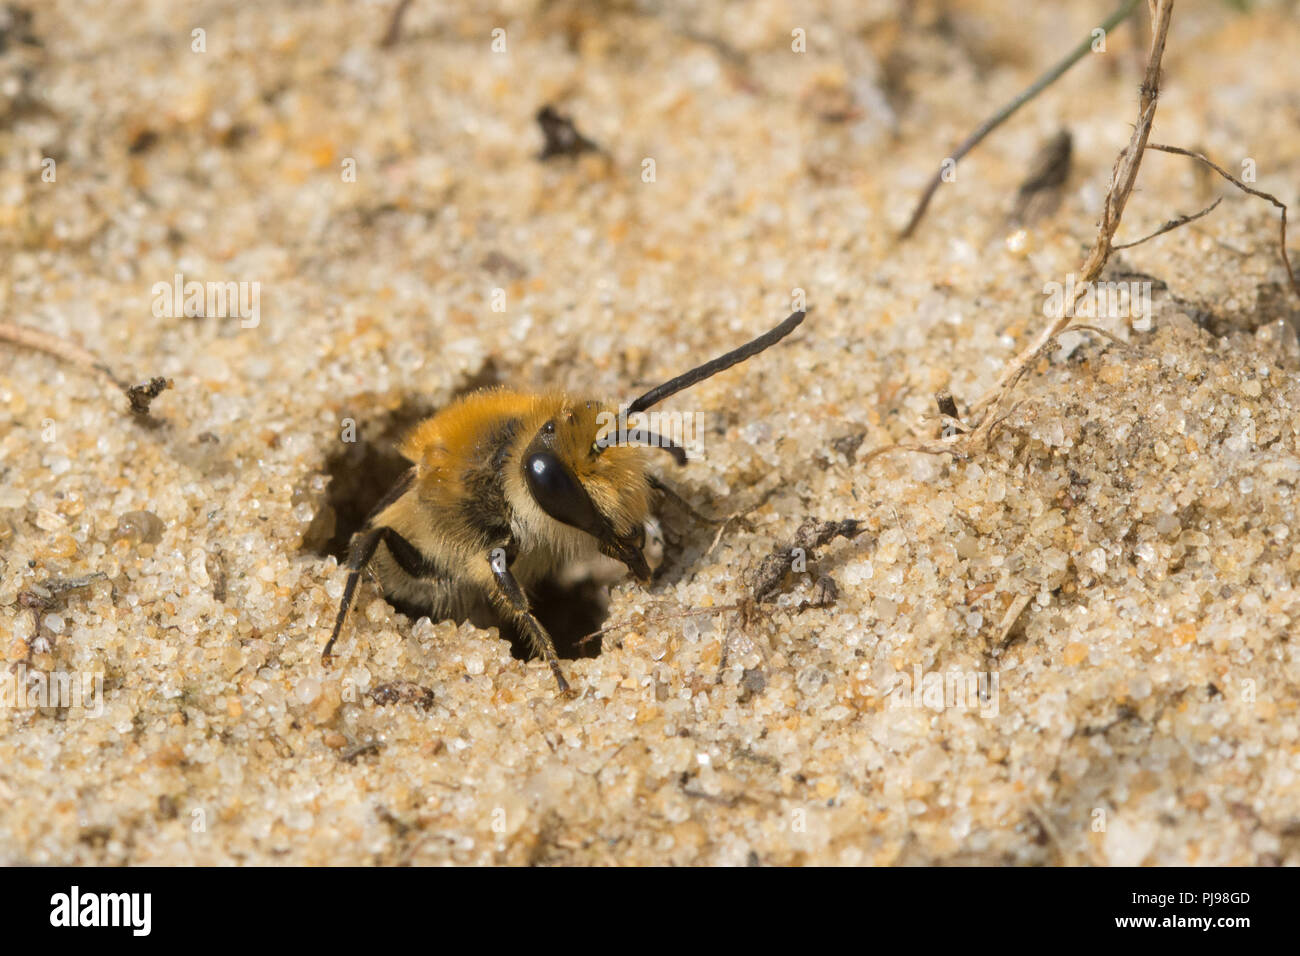 Ivy bee (Colletes hederae), a solitary species of bee first seen in the British Isles in 2001, emerging from a burrow in the sand in Hampshire, UK Stock Photo